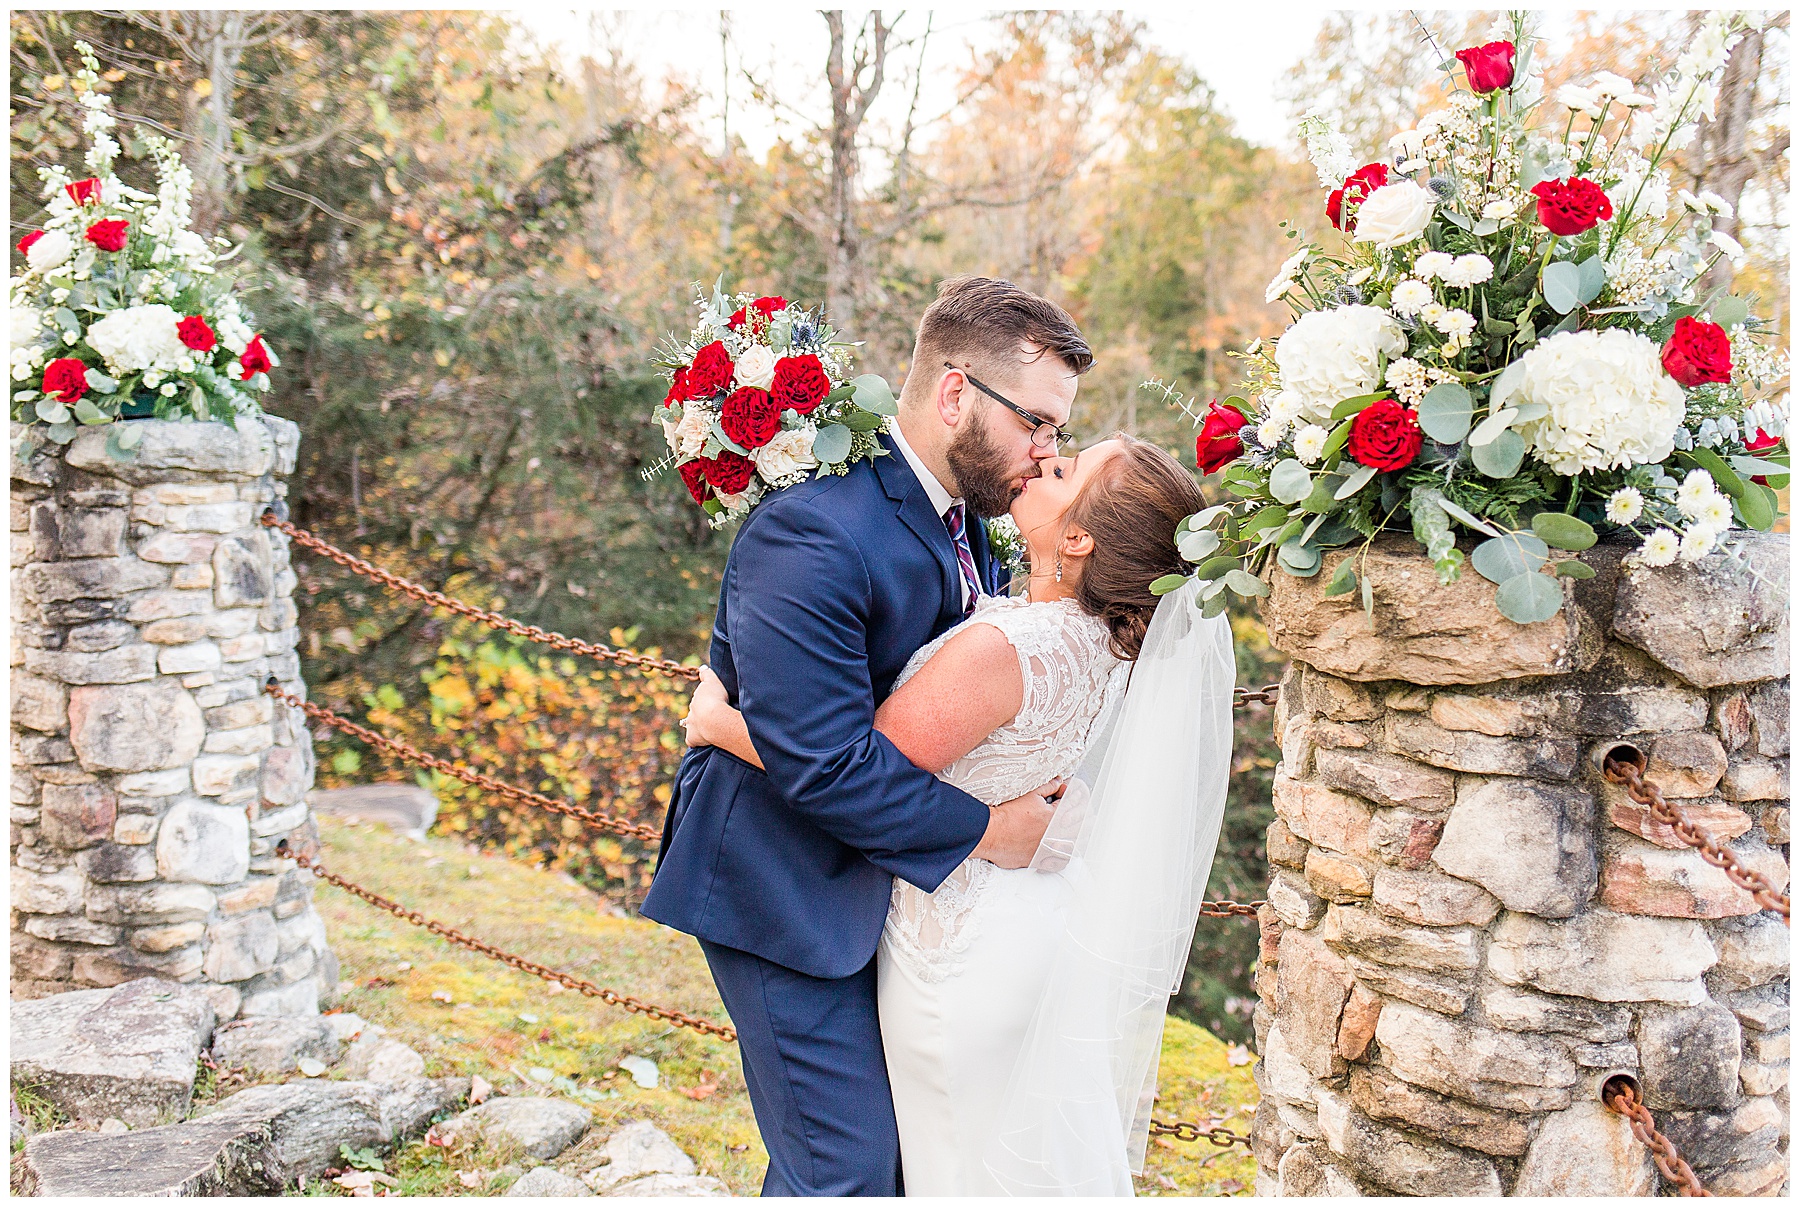 Chrissy + John | Mountain Wedding at The Confluence Resort | West ...